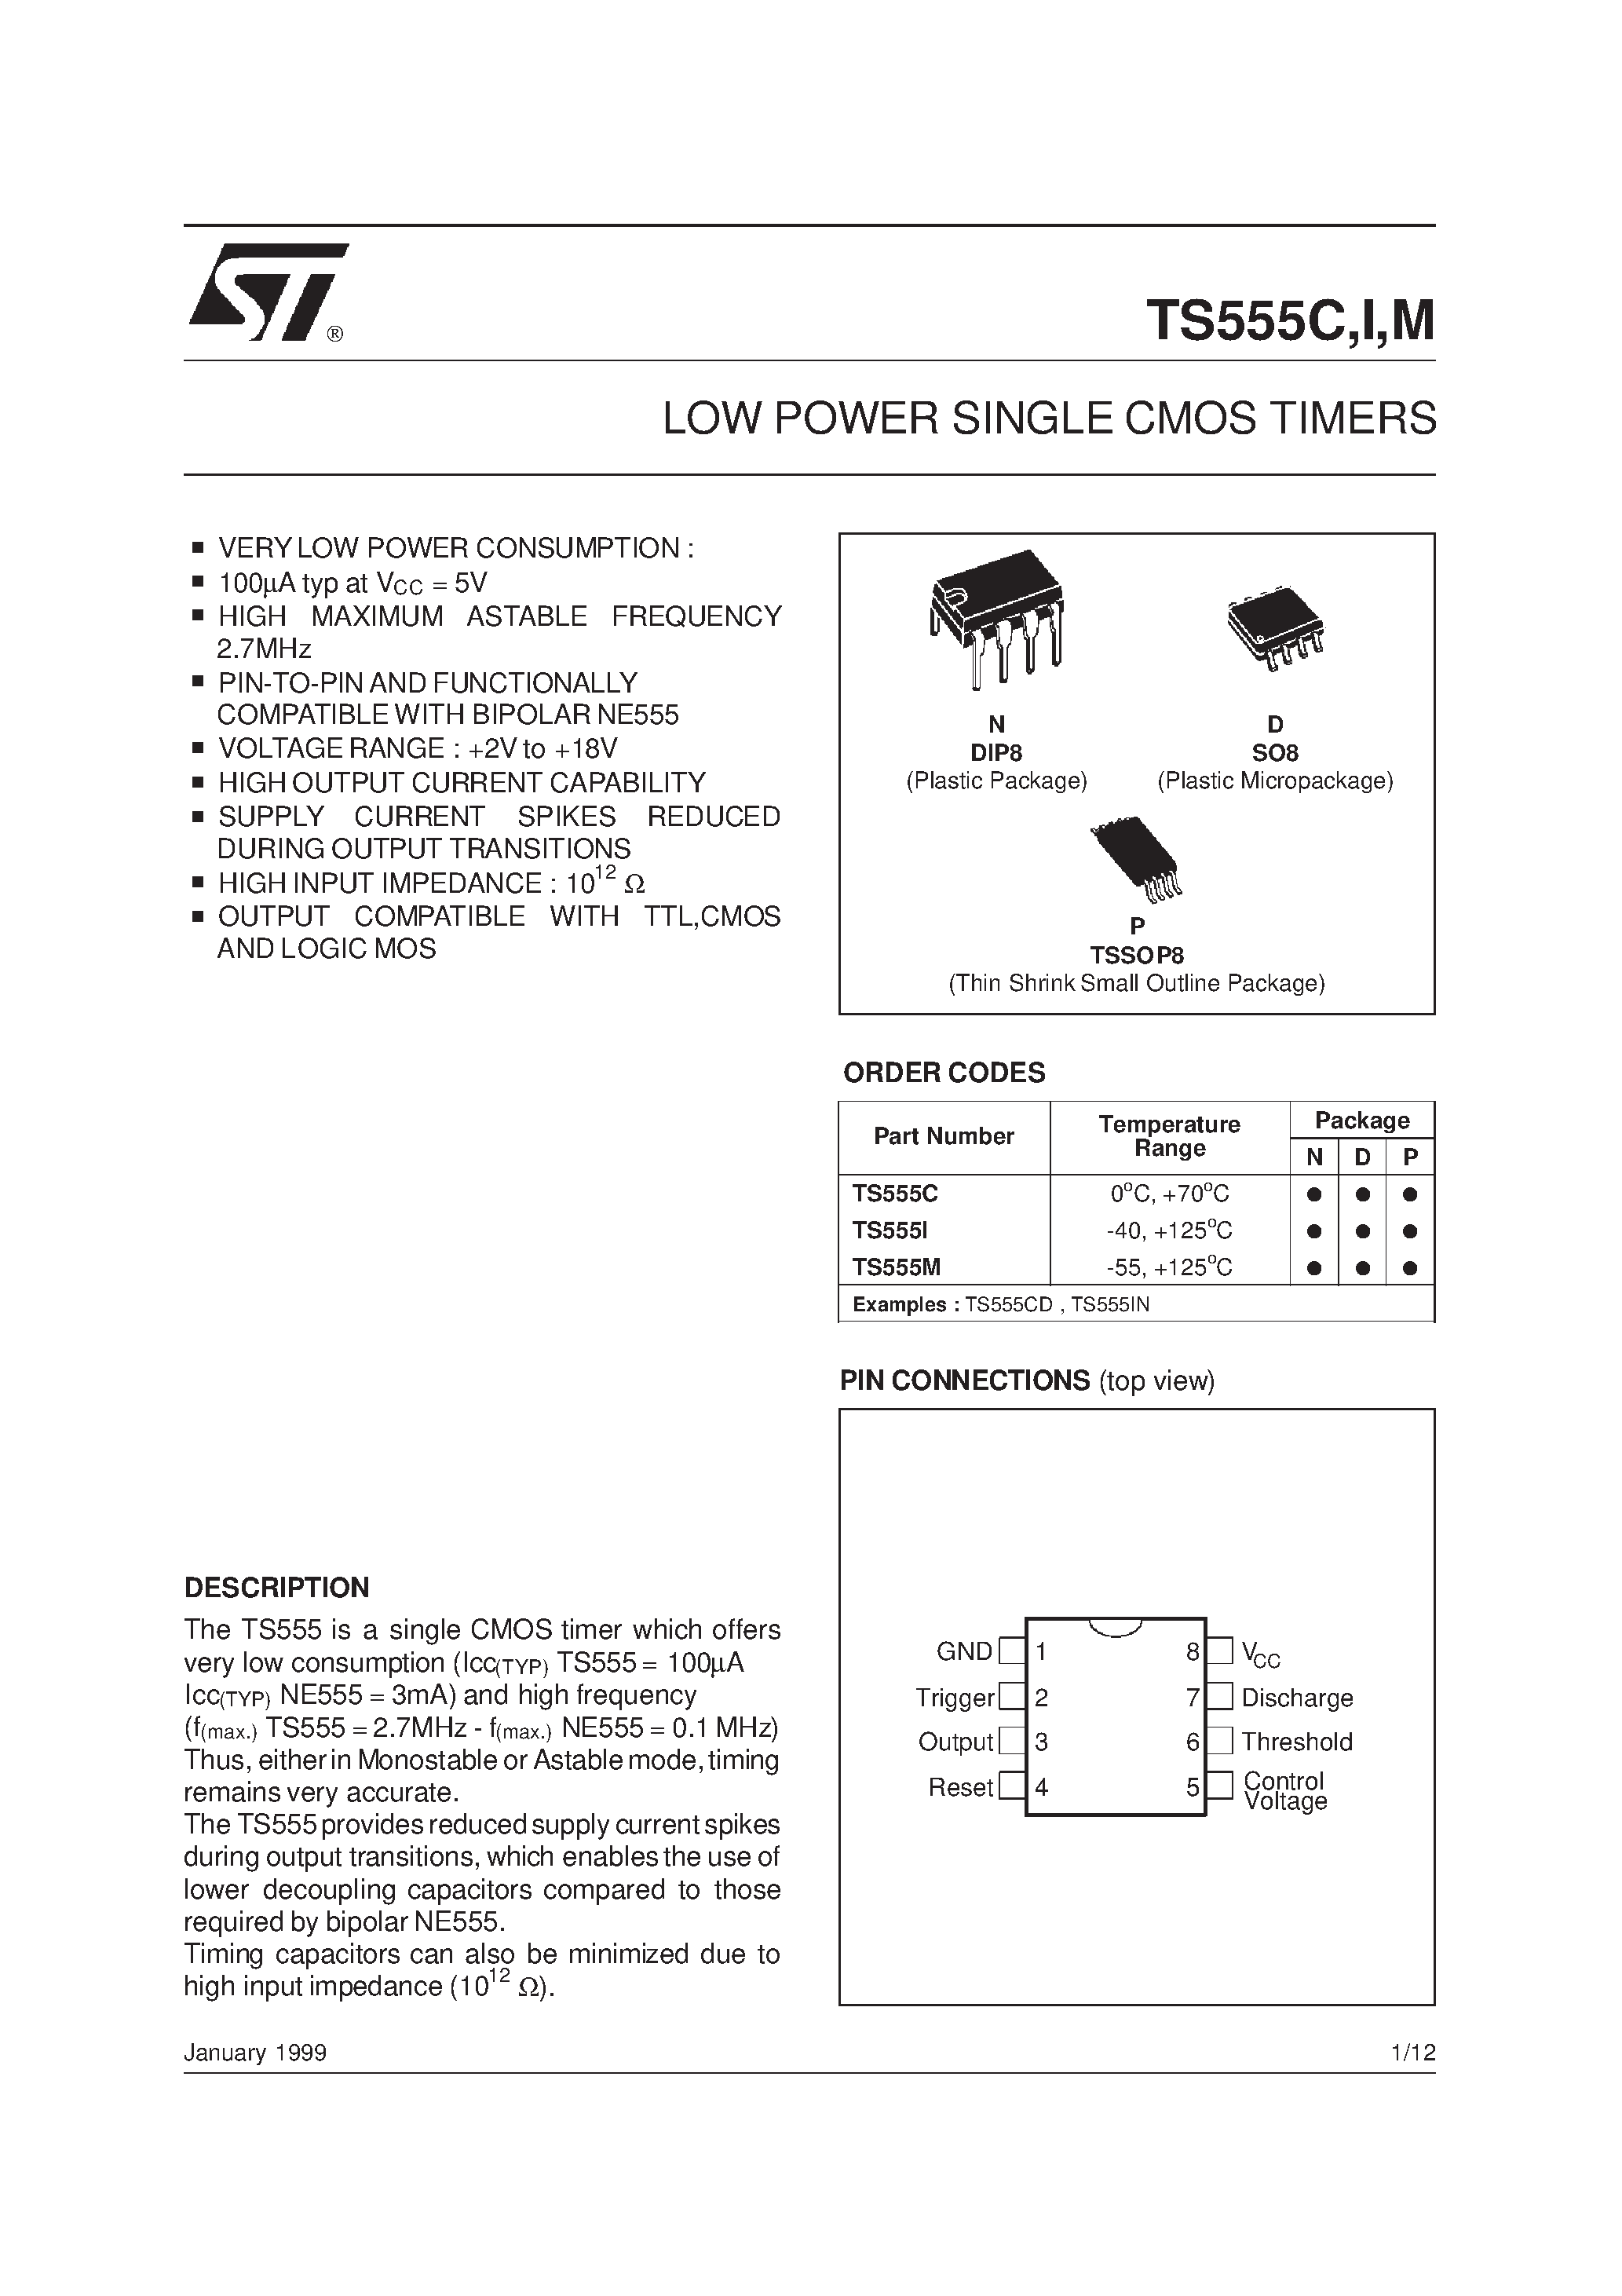 Datasheet TS555M - LOW POWER SINGLE CMOS TIMERS page 1